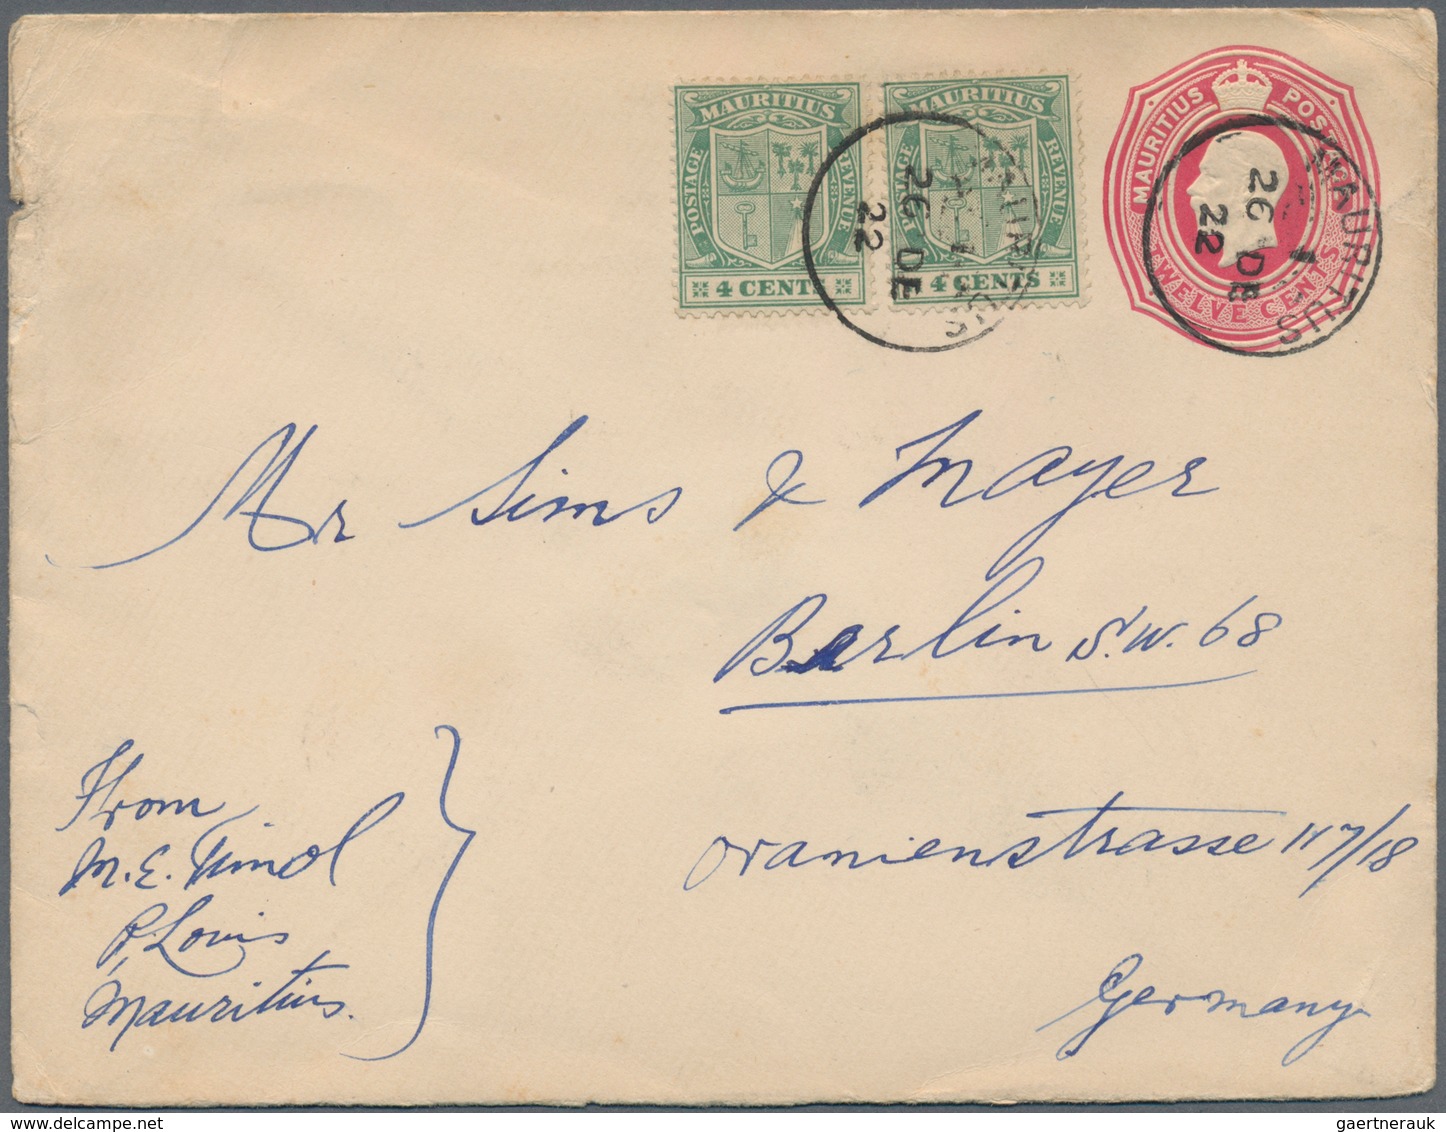 Mauritius: 1922. King George V 12c Carmine Envelope With Two 4c Added Cancelled Mauritius 26 DE 22 A - Mauritius (...-1967)